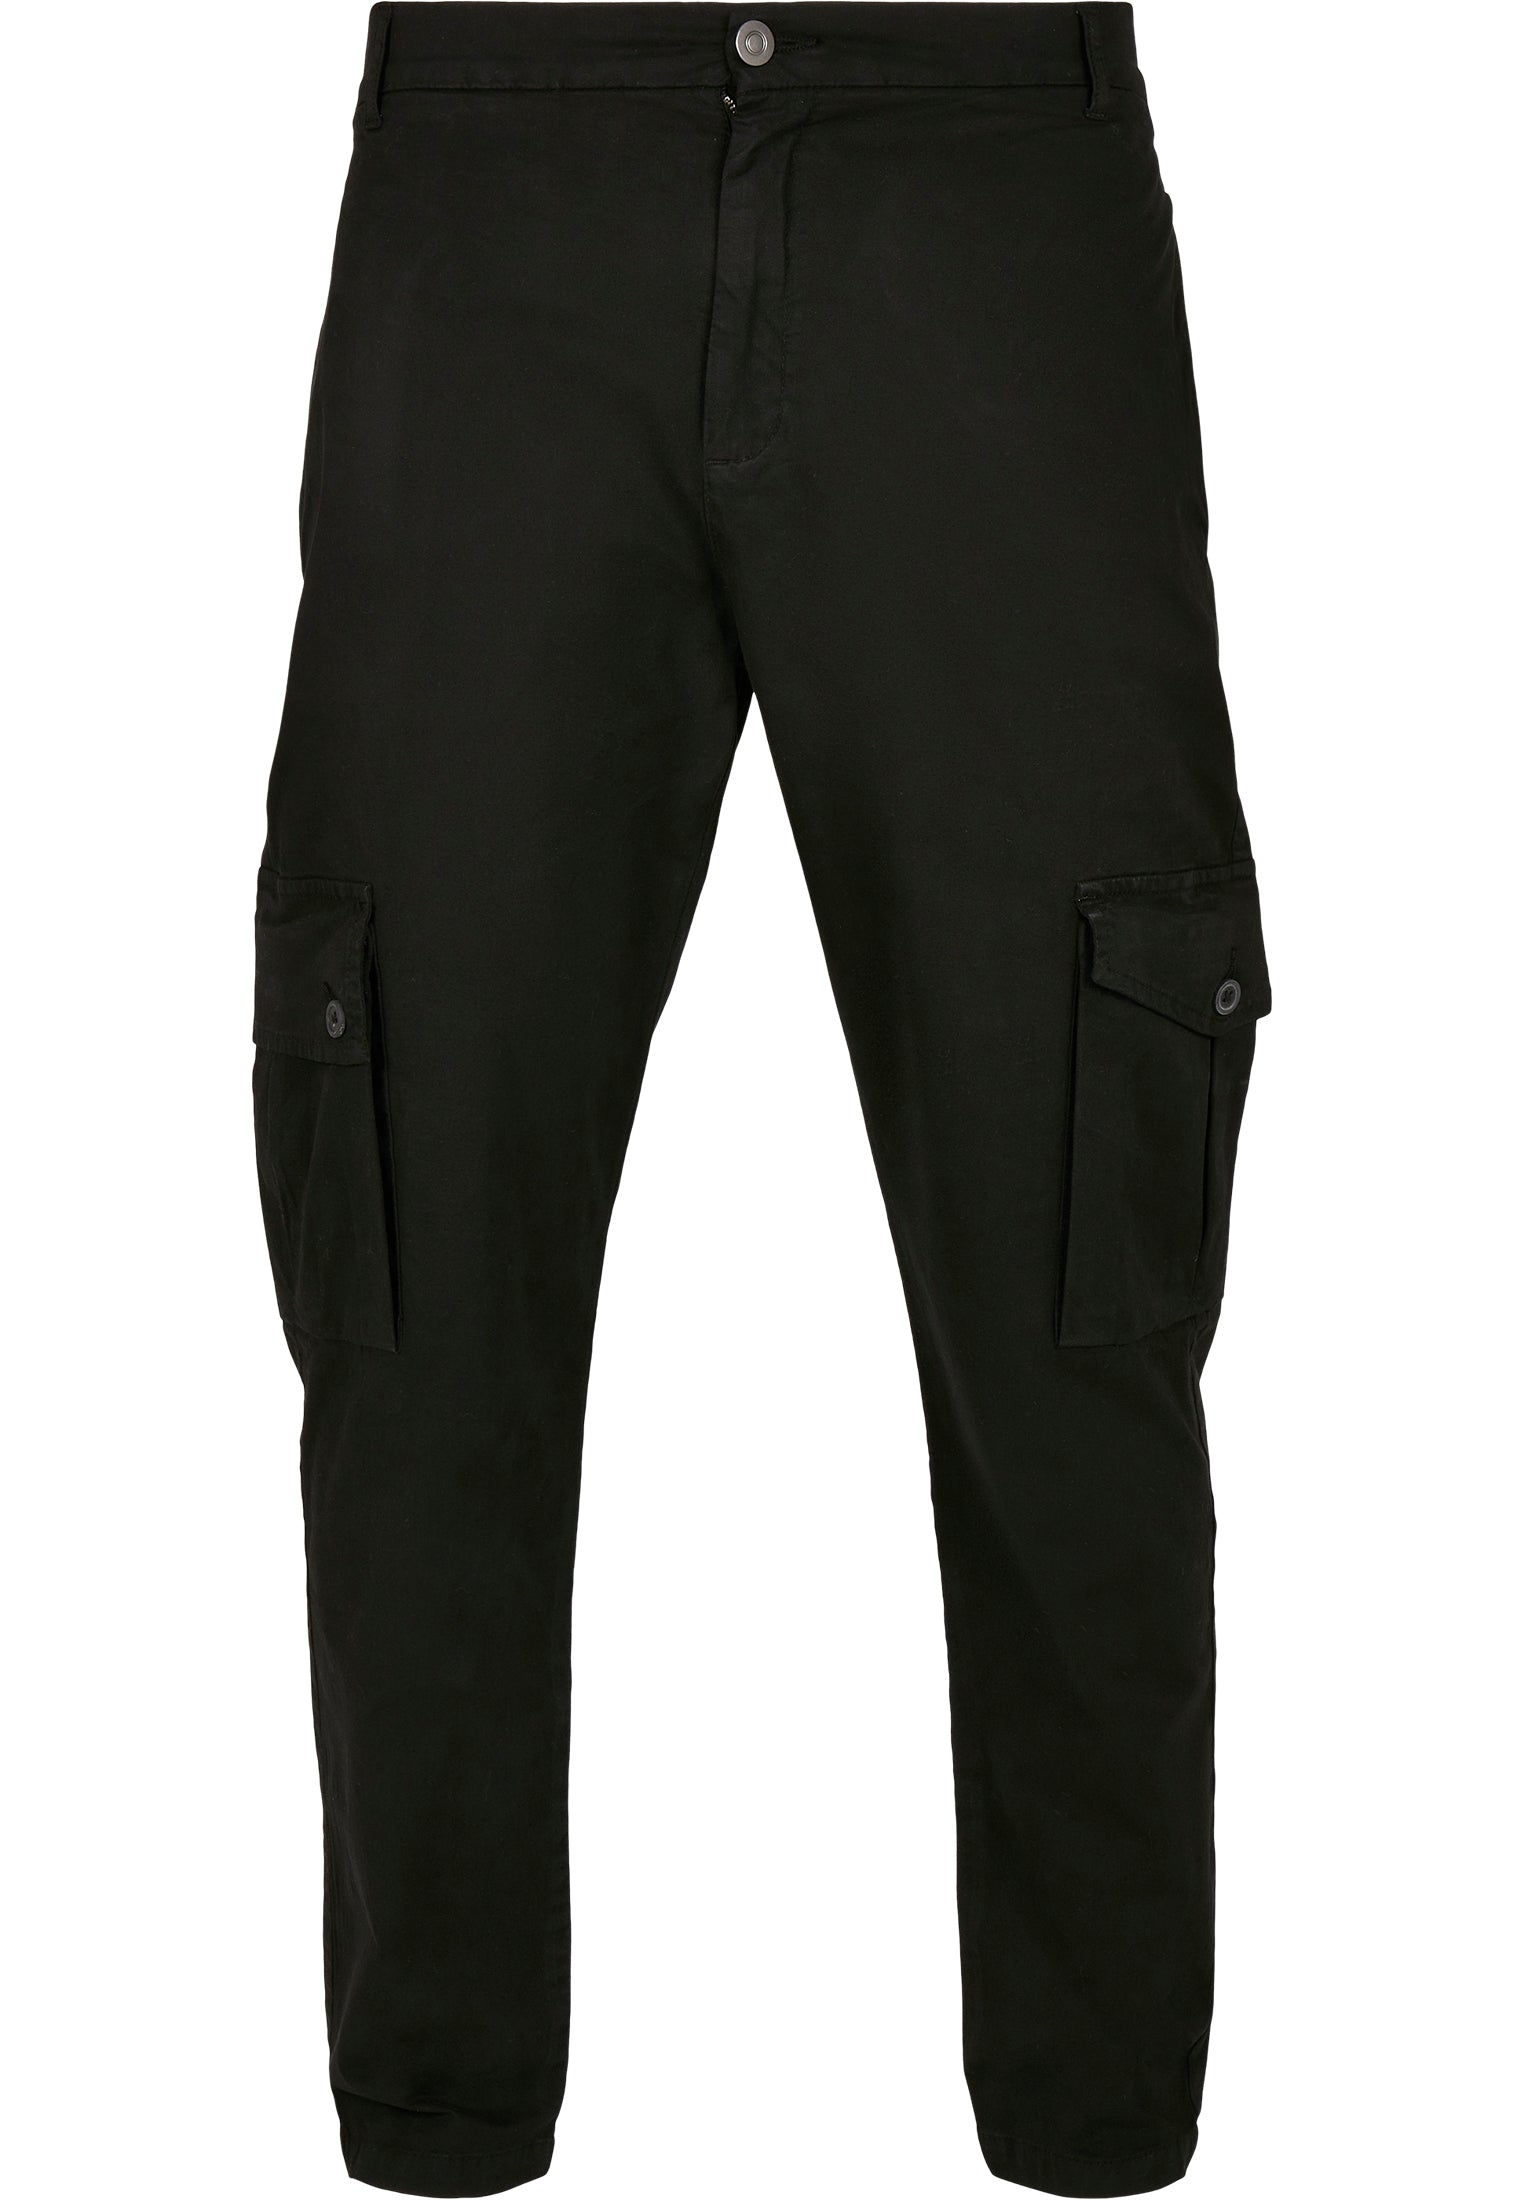 TB 3507 tapered cargo pants